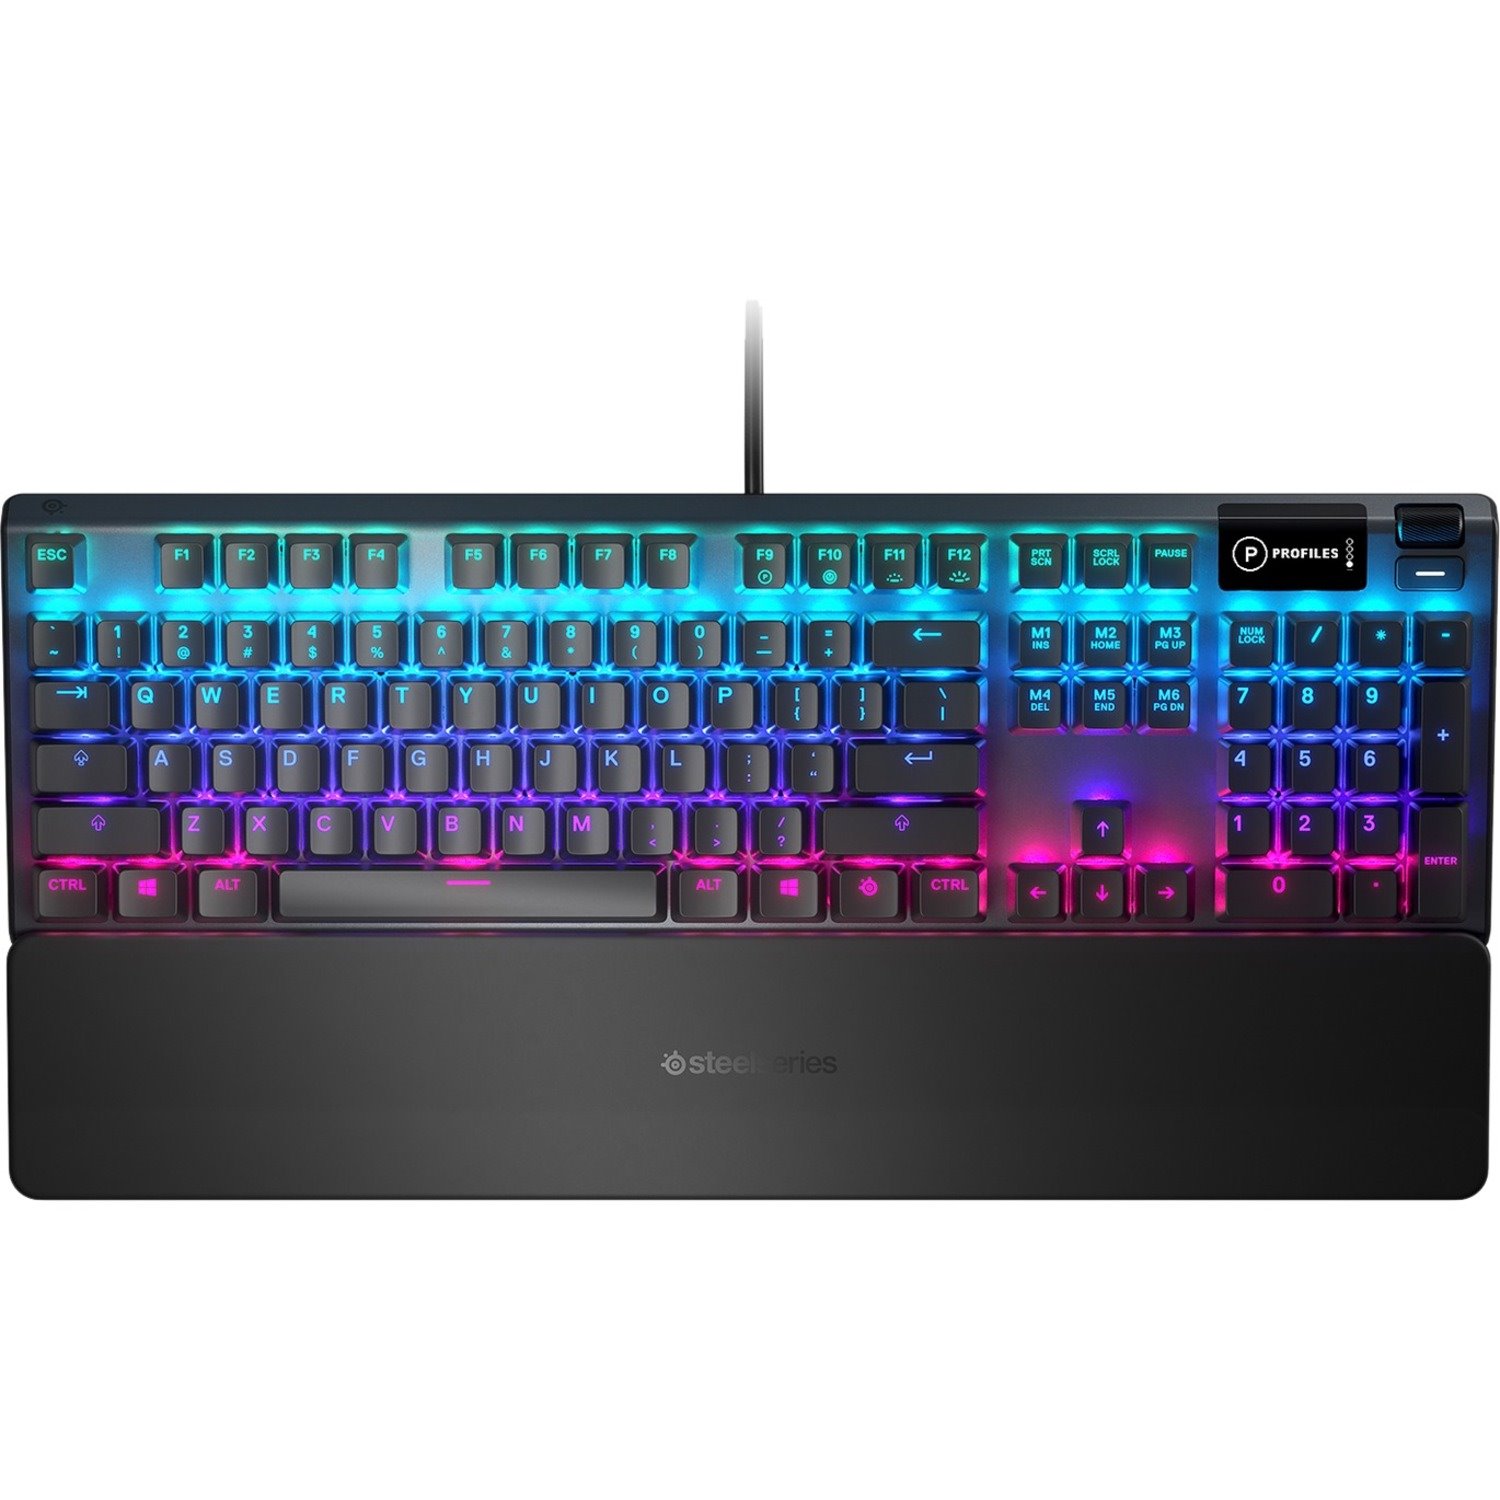 SteelSeries Apex 5 Gaming Keyboard - Cable Connectivity - USB Interface - English (UK) - QWERTY Layout - Black